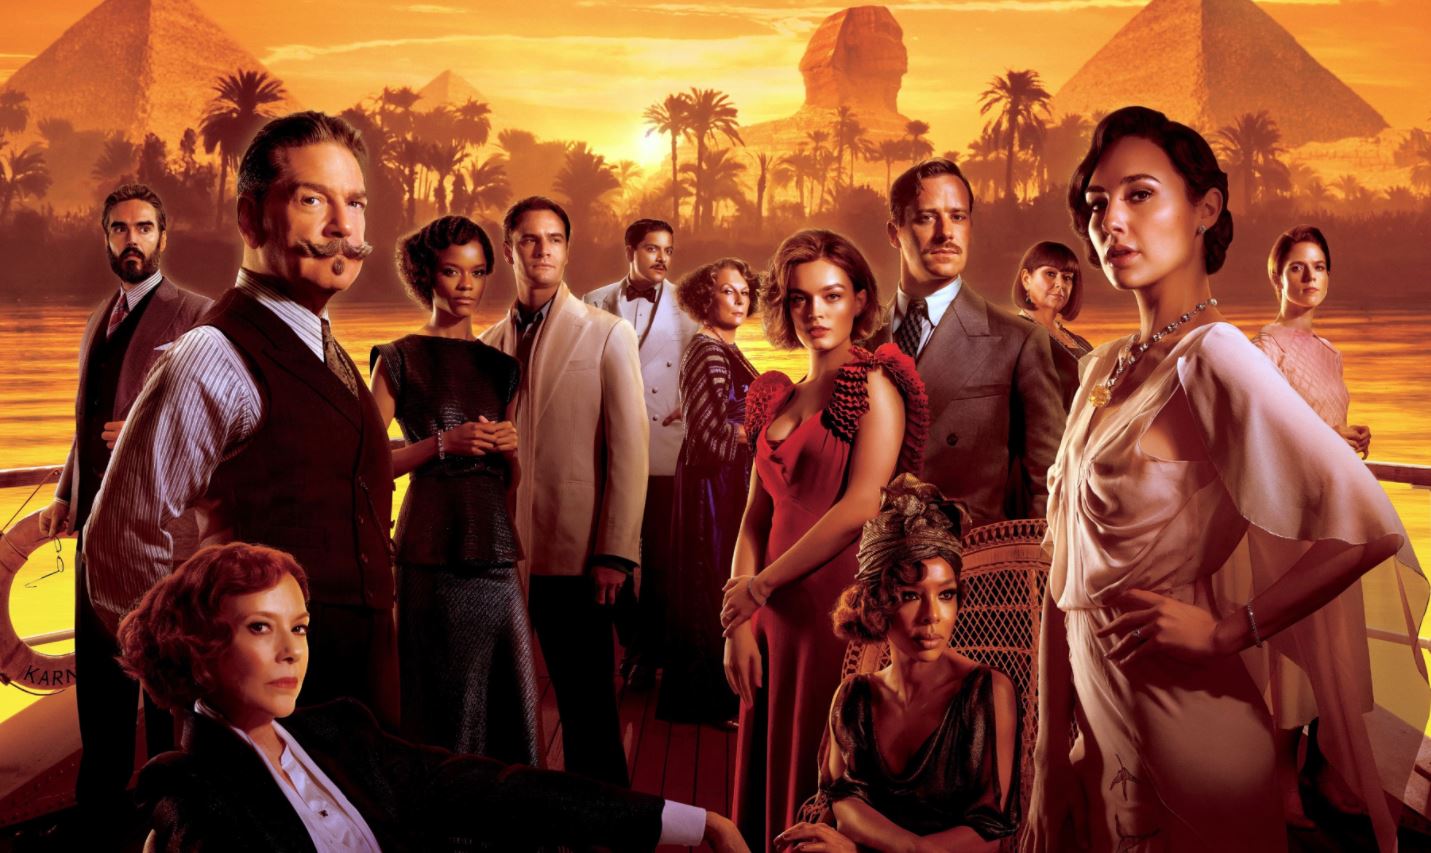 Watch Film Death on the Nile (2022) Full Movie Free Online